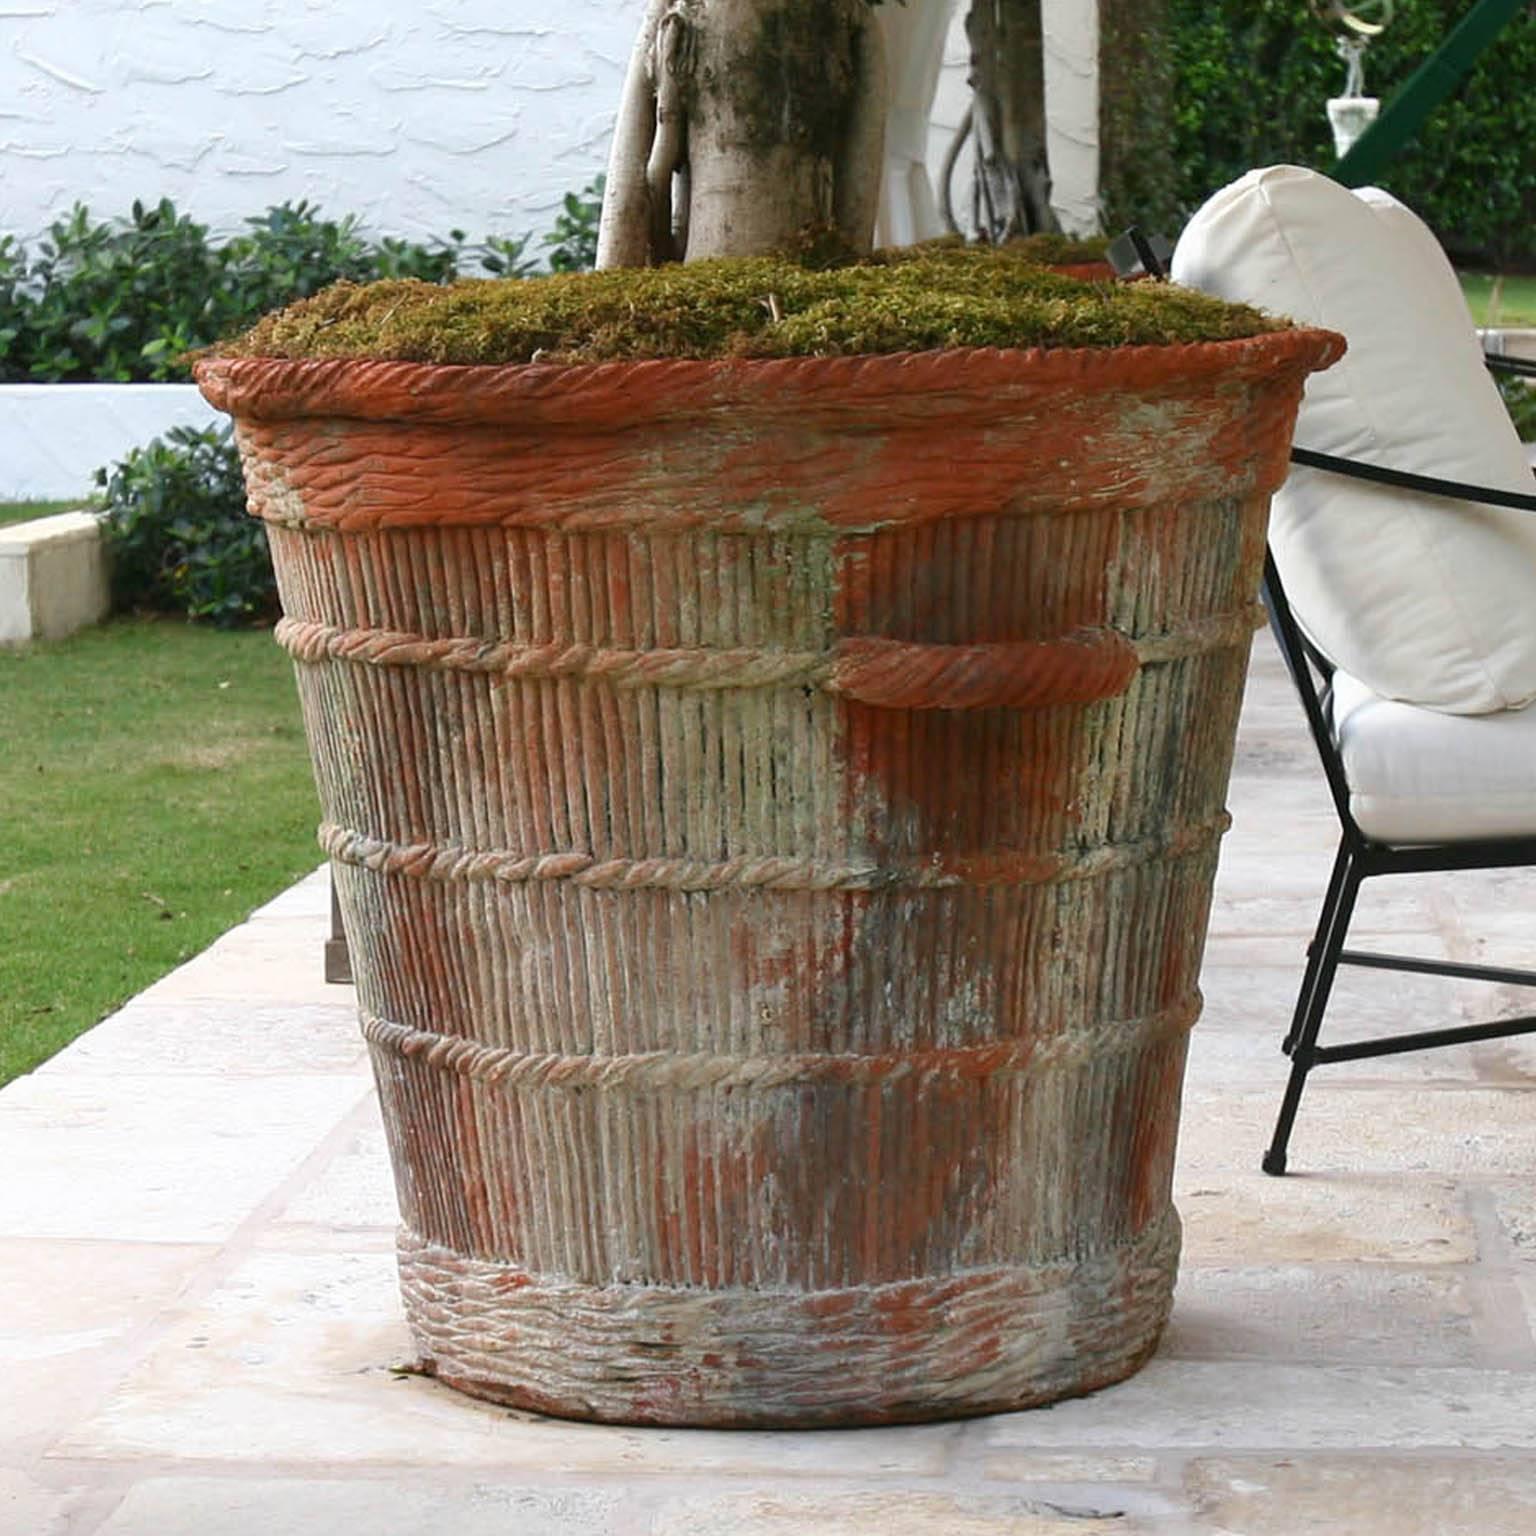 Very large, round garden jardinière from France with two lateral handles and beautifully handcrafted basket woven details in terra cotta. Lot of six planters available, but sold also singularly.